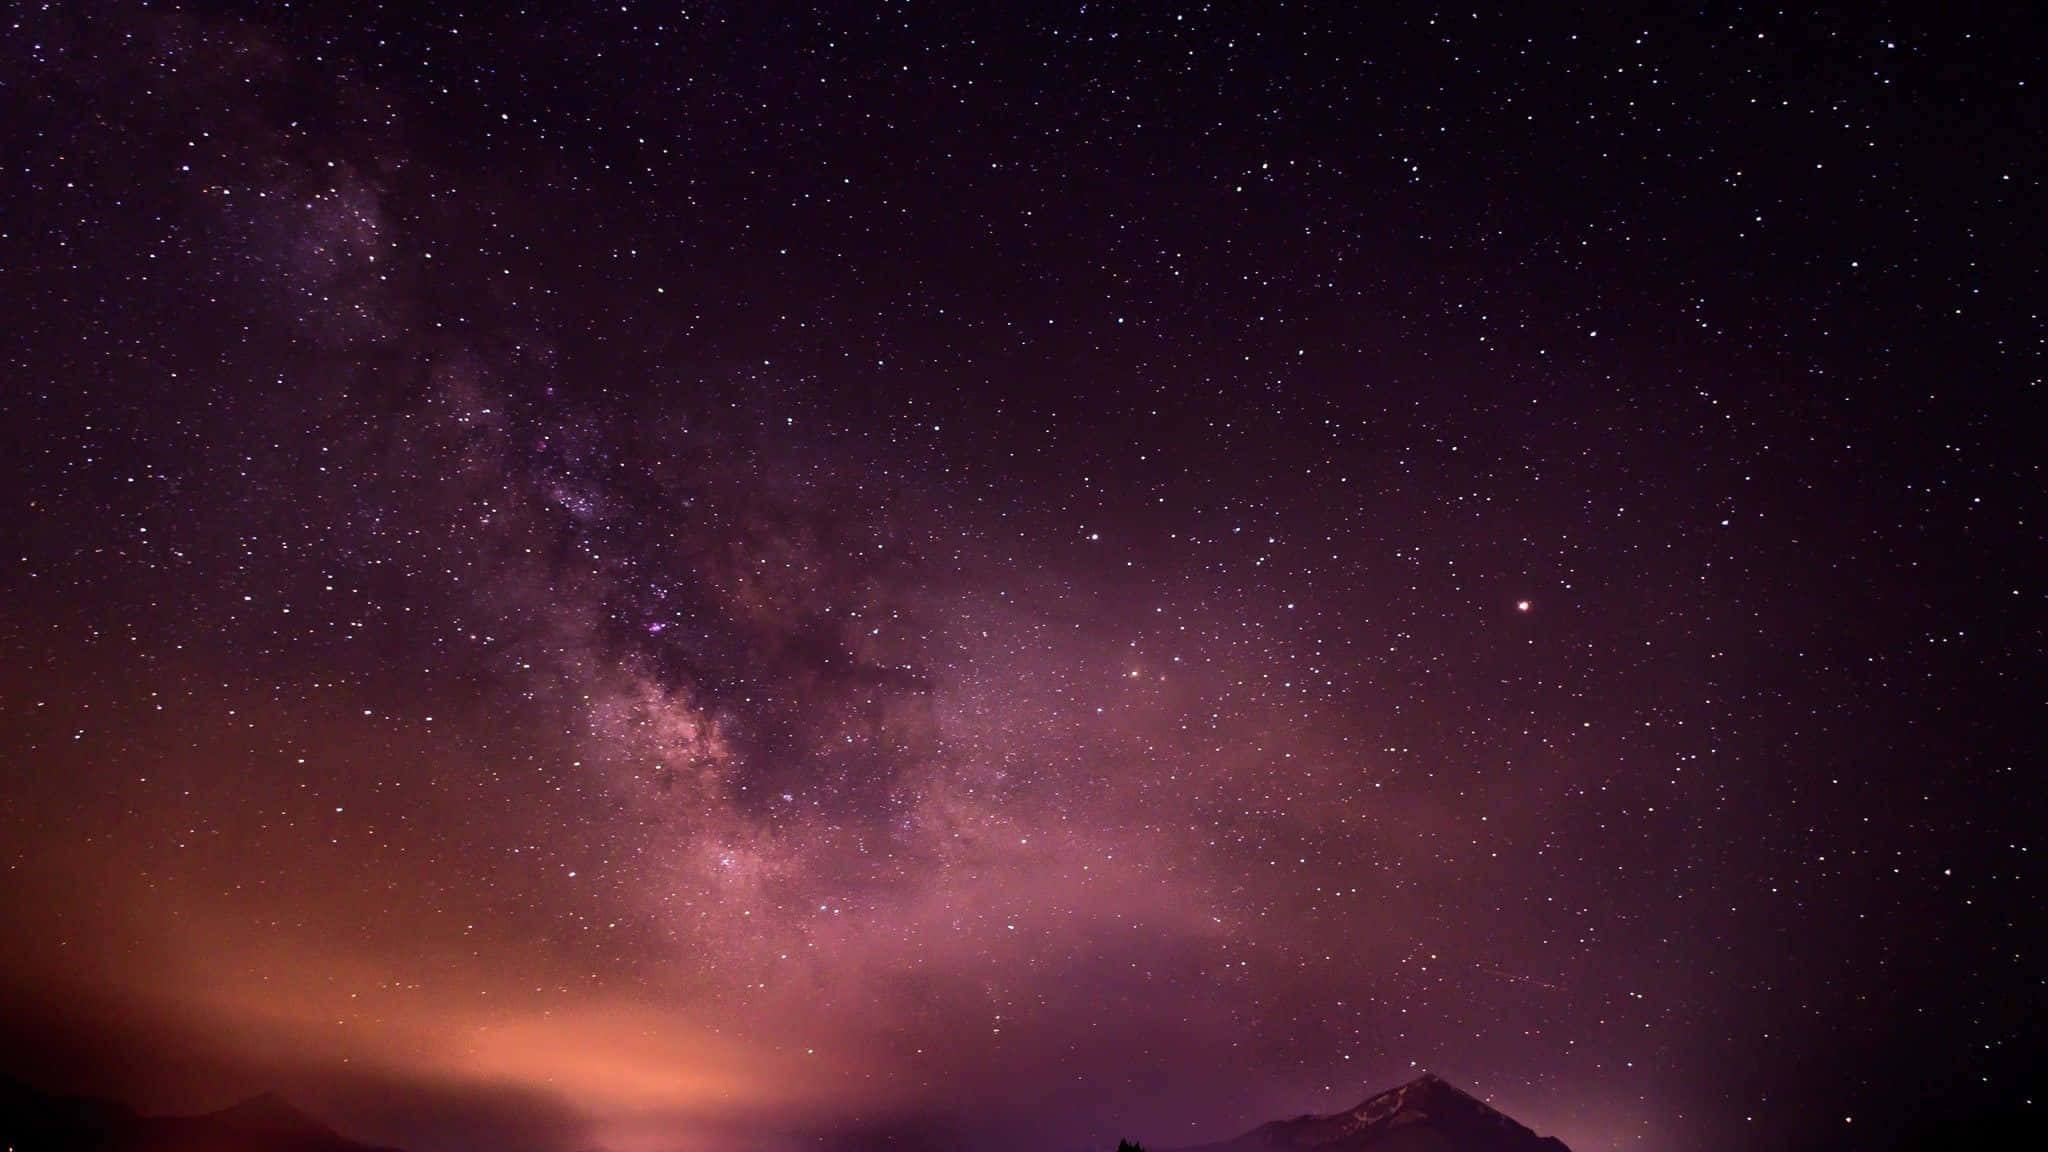 Explore a different galaxy filled with stars" Wallpaper